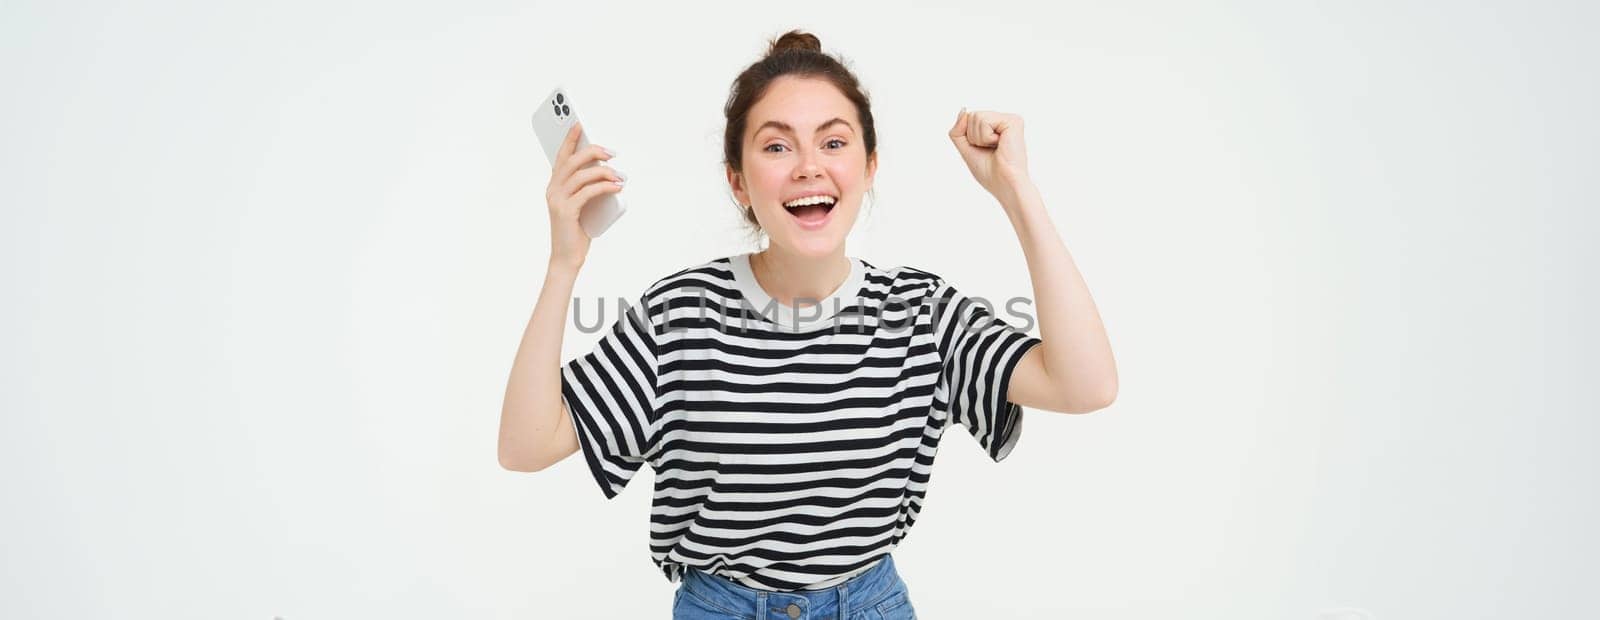 Portrait of happy woman laughing, holding telephone, using smartphone and chanting, rooting for someone, holding hands up, isolated over white background.